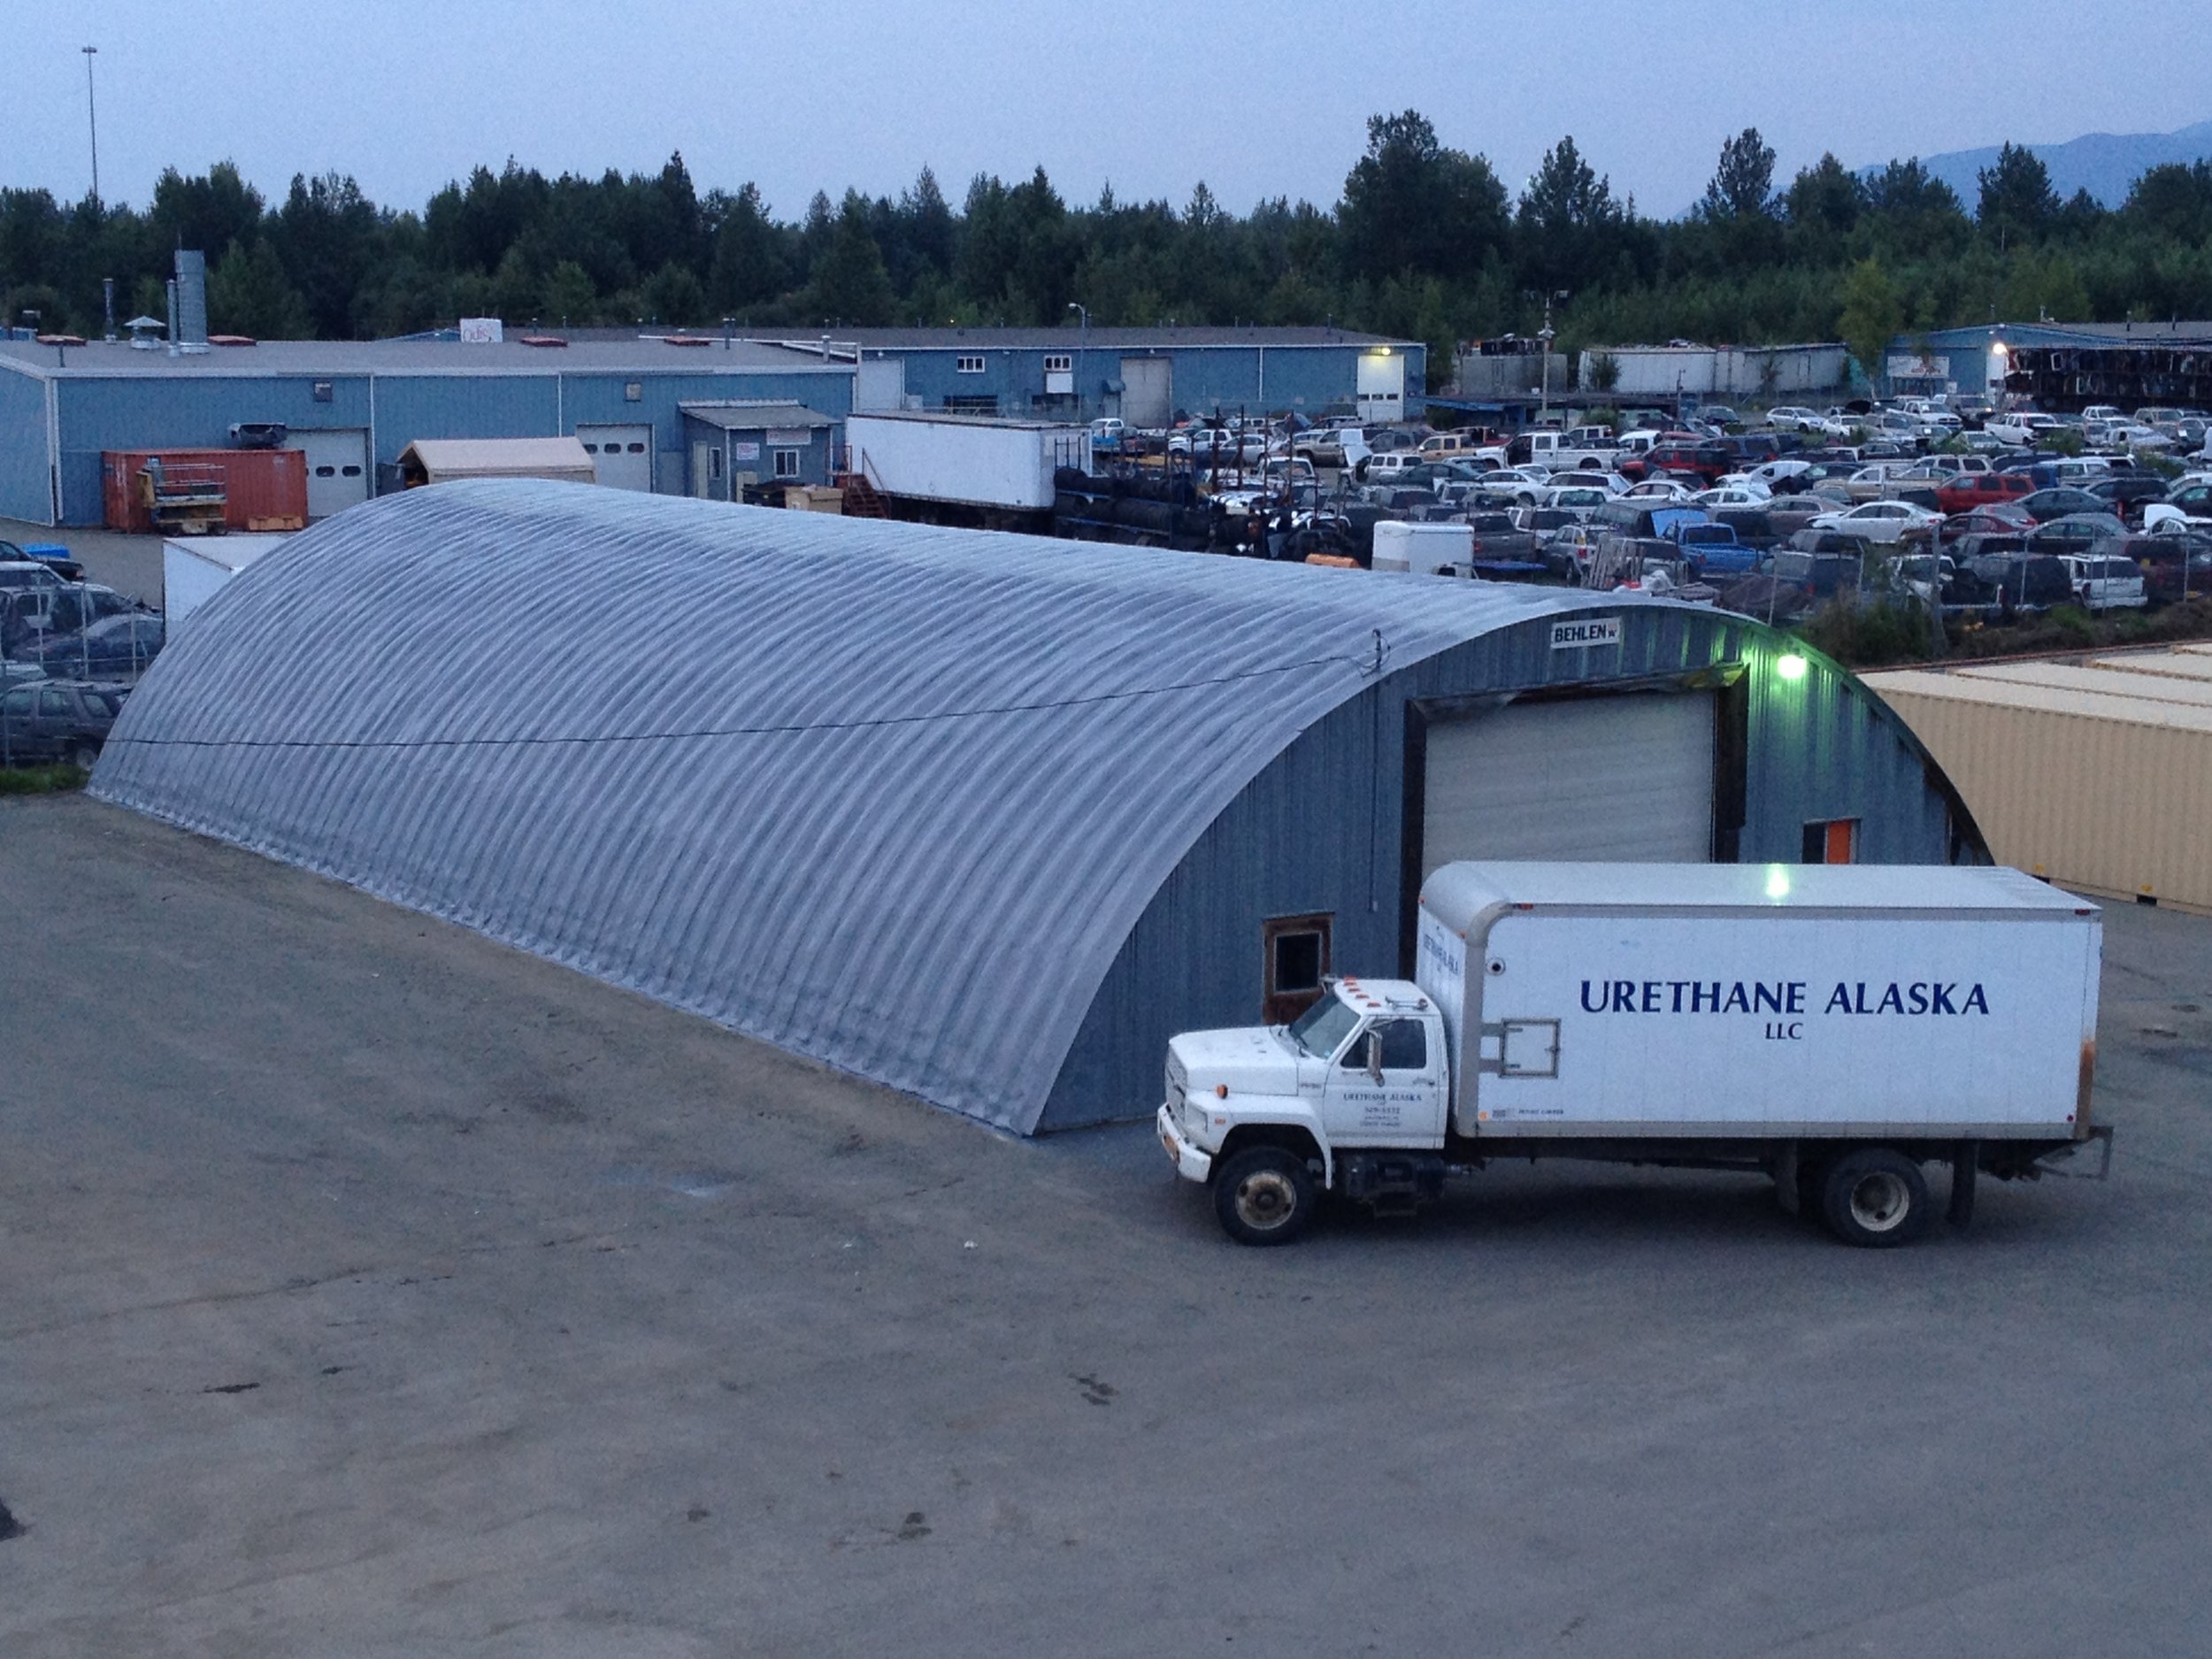  Quonset hut with urethane and polyshield coating.&nbsp; 